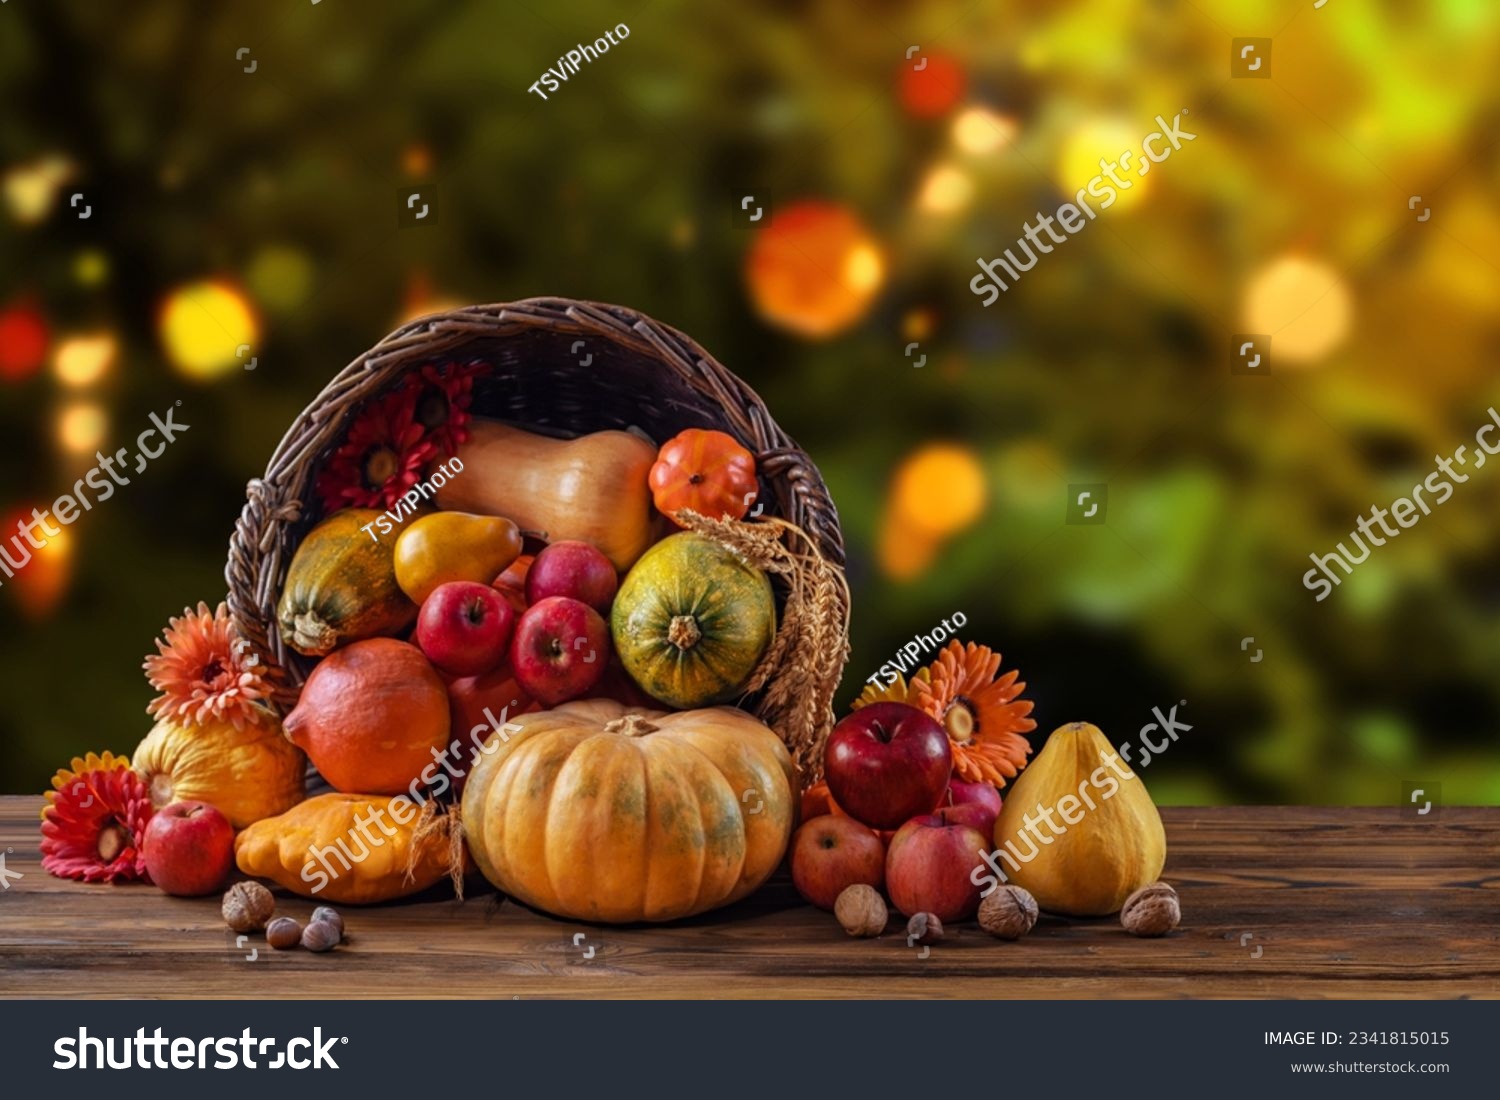 Thanksgiving day still life, background with empty copy space. Pumpkin harvest in wicker basket. Squash, vegetable autumn fruit, apples, and nuts on a wooden table. Halloween decoration fall design. #2341815015